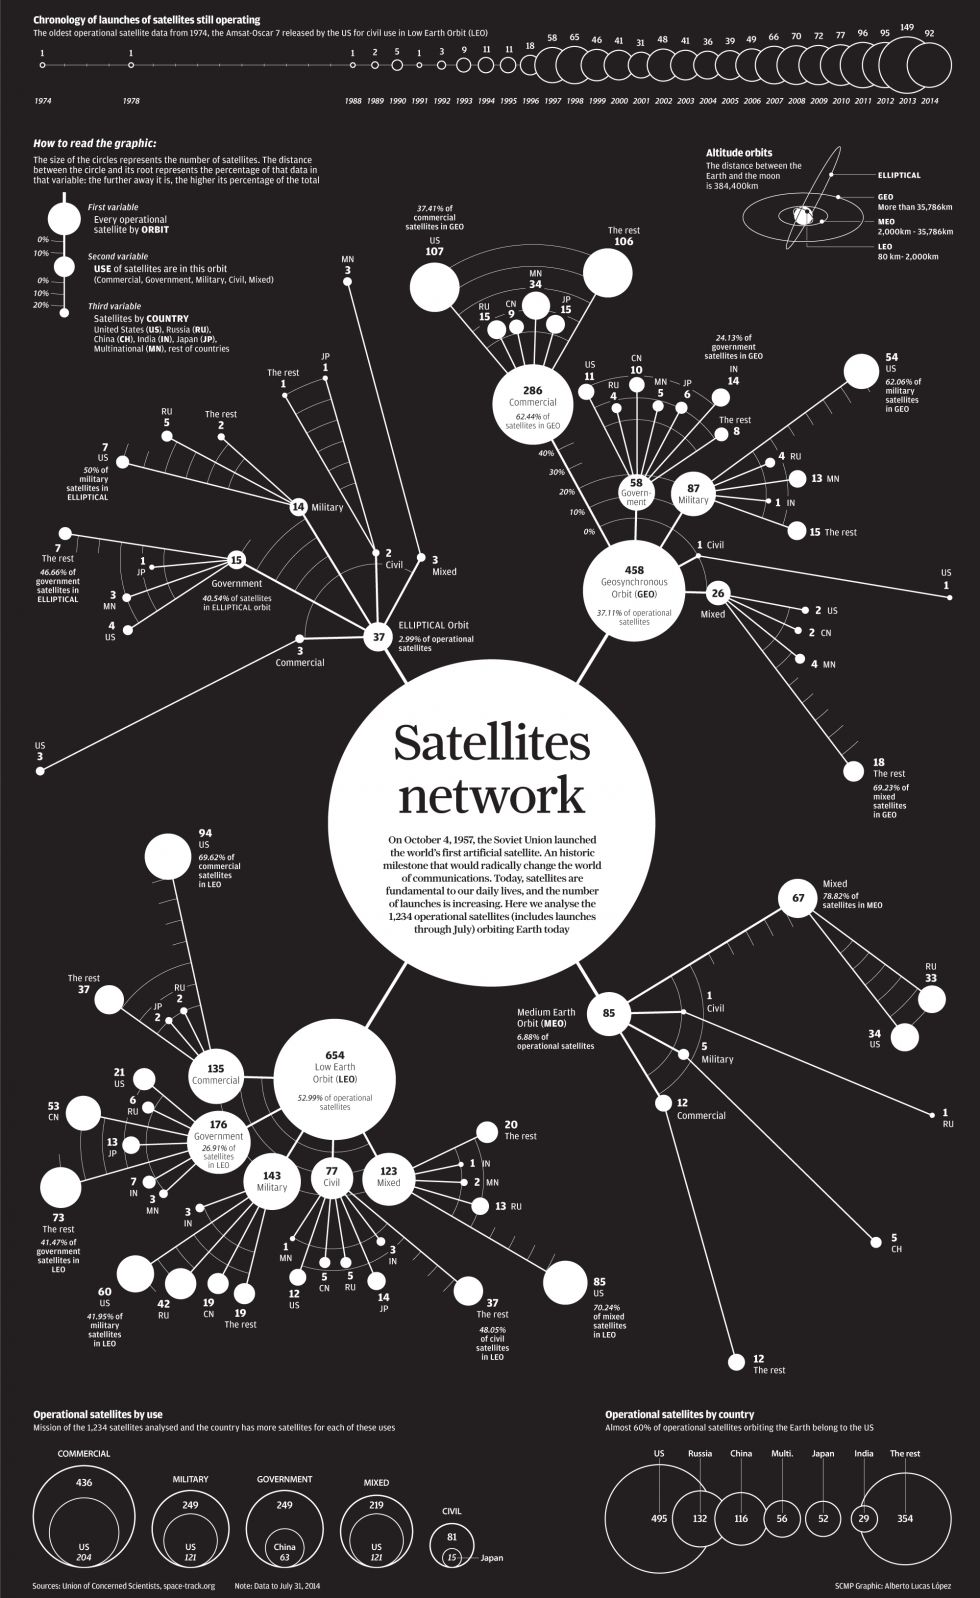 INFOGRAPHIC: The 1,234 satellites orbiting earth